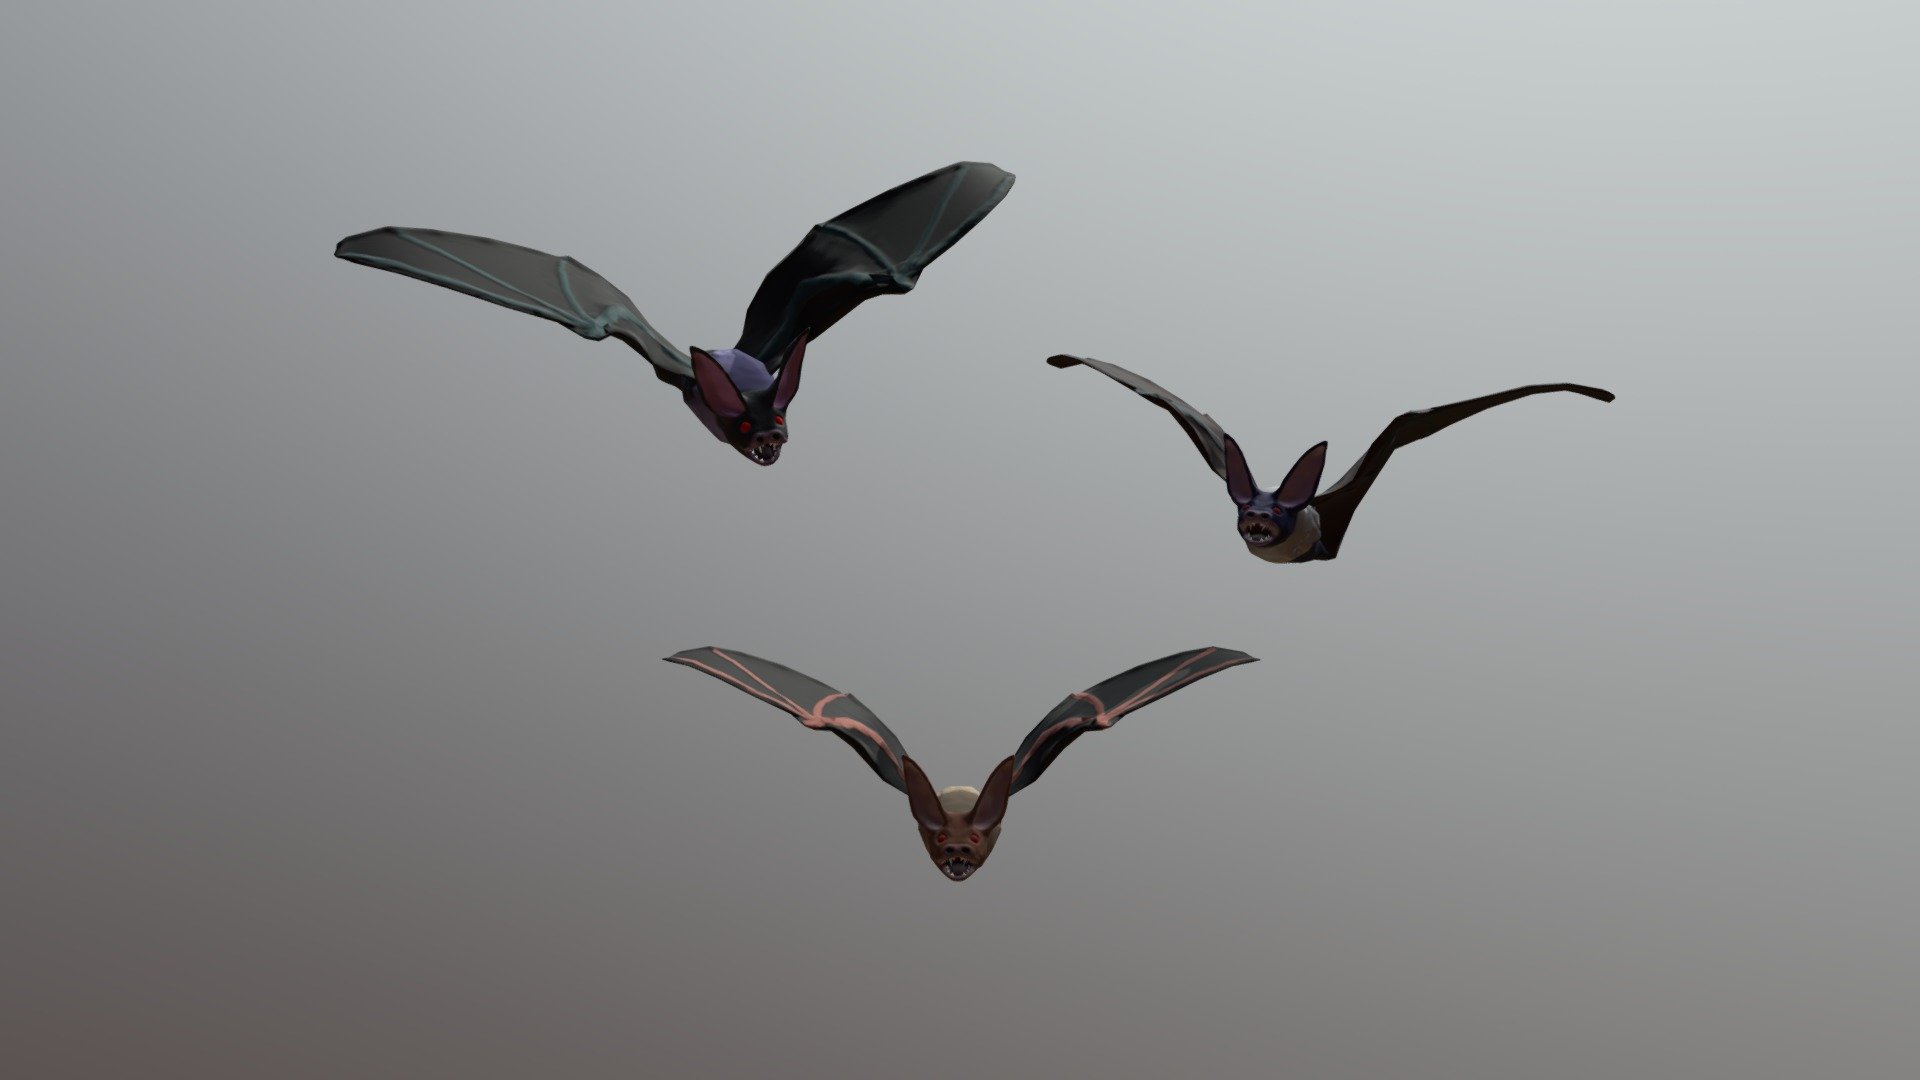 This is a Game Model I made in 2018 for a Semester Project while Studying Game Design at MD.H.
The Bat is an Enemy in Rain Planet flying fixed routes damaging the player when they collide. I made 3 Color Variants, we ultimately went for the dark one on the left since it clearly communicates that the bat is a threat.

Game: Rain Planet (Project 3rd Semester)
Software Used: Blender, Maya, Substance Painter - Bat - 3D model by Daniel-Marcel Reinders (@DonWippo) 3d model